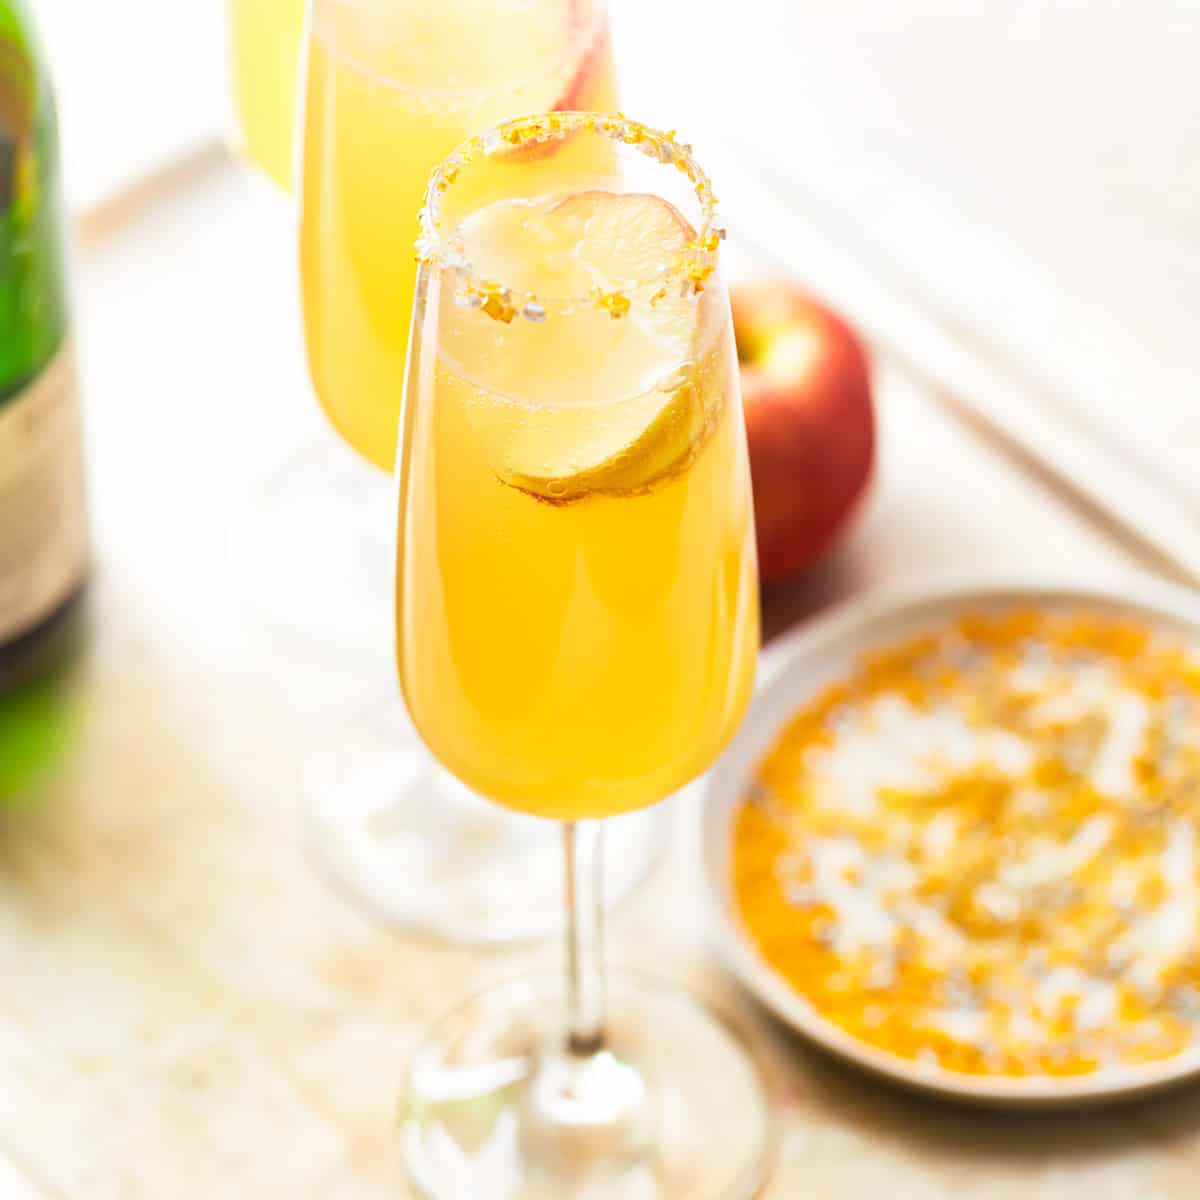 How to Make a Prosecco Mimosa (2-ingredient Prosecco Mimosa recipe)